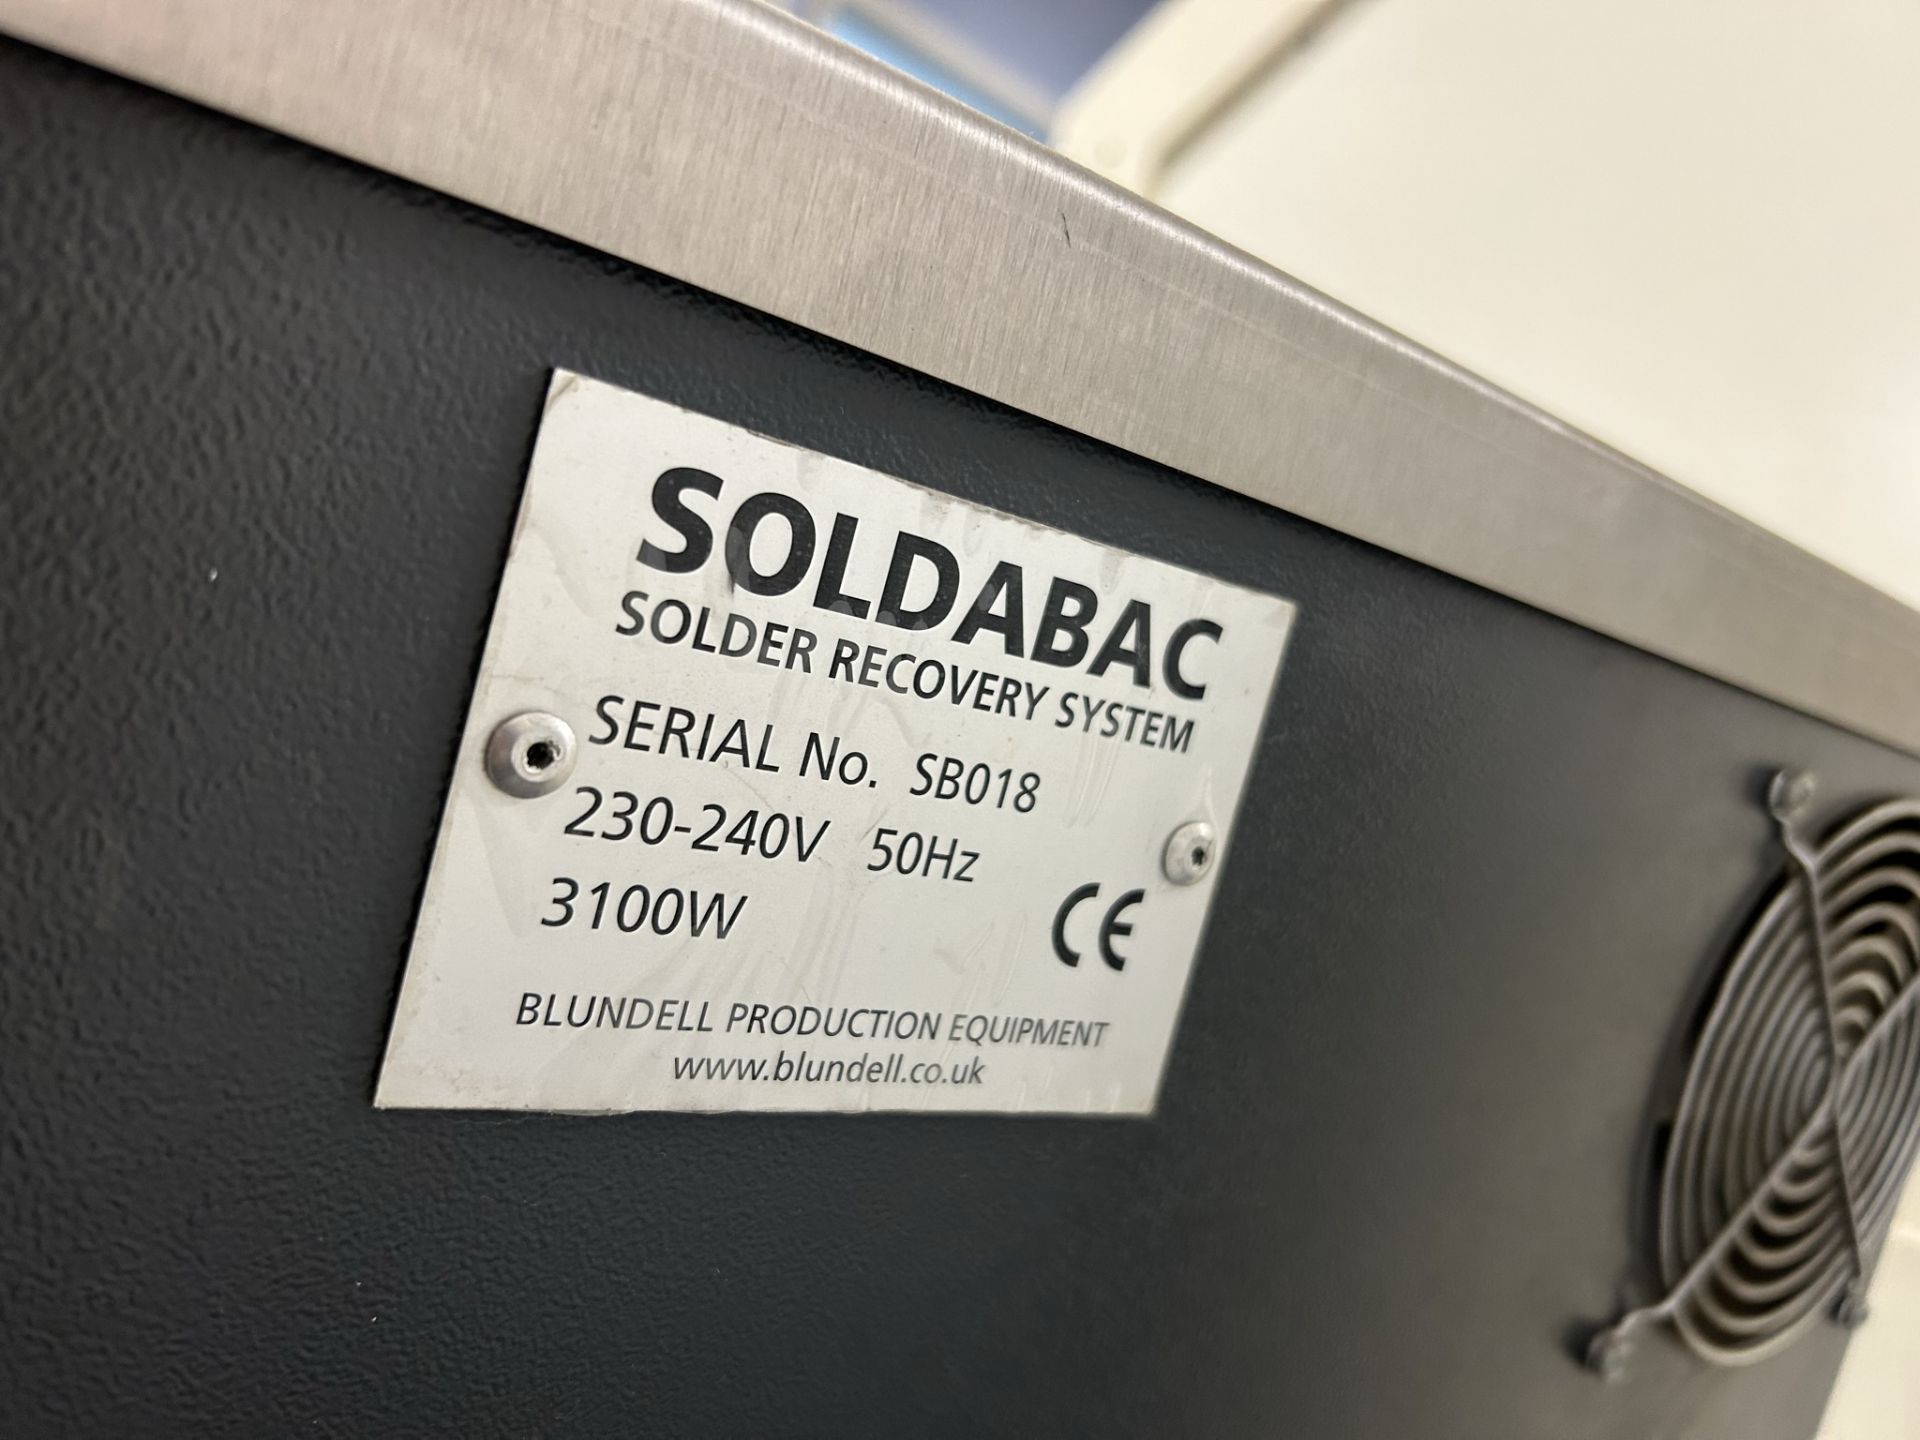 Blundell Soldabac Solder Recovery System - Image 5 of 5